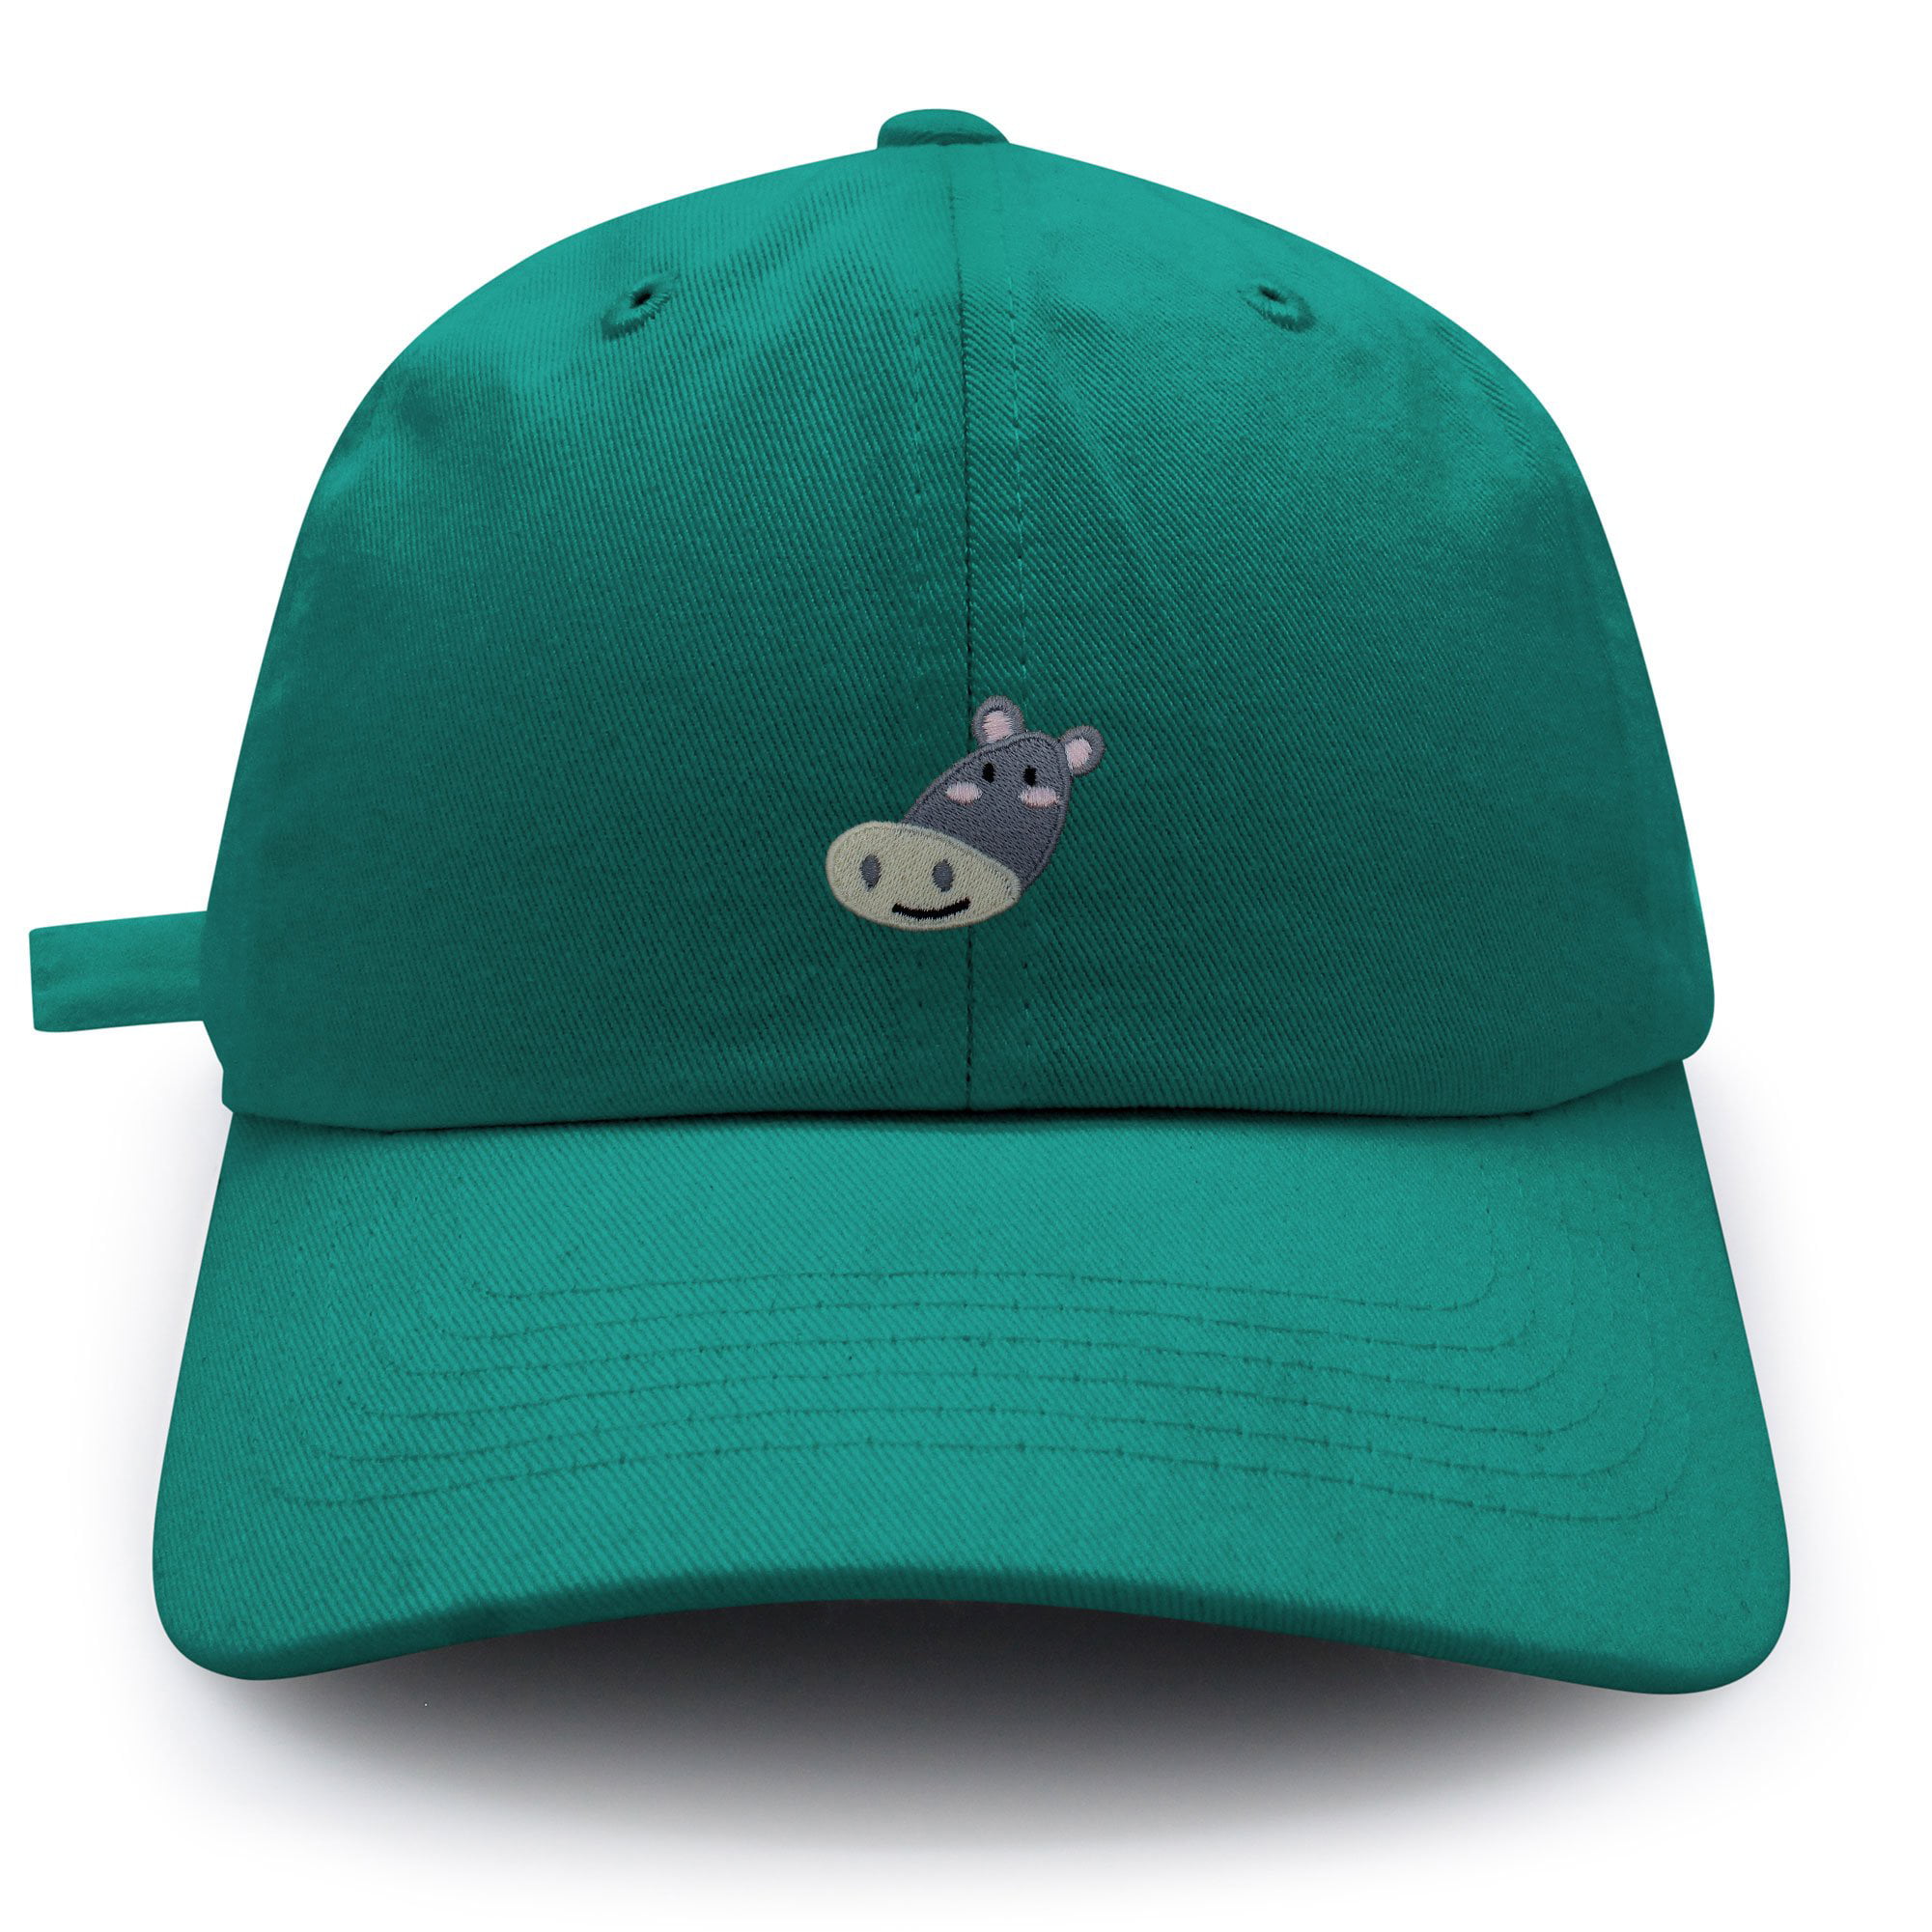 Custom Snapback Hats for Men & Women I Love Cats Silhouette Embroidery Cotton